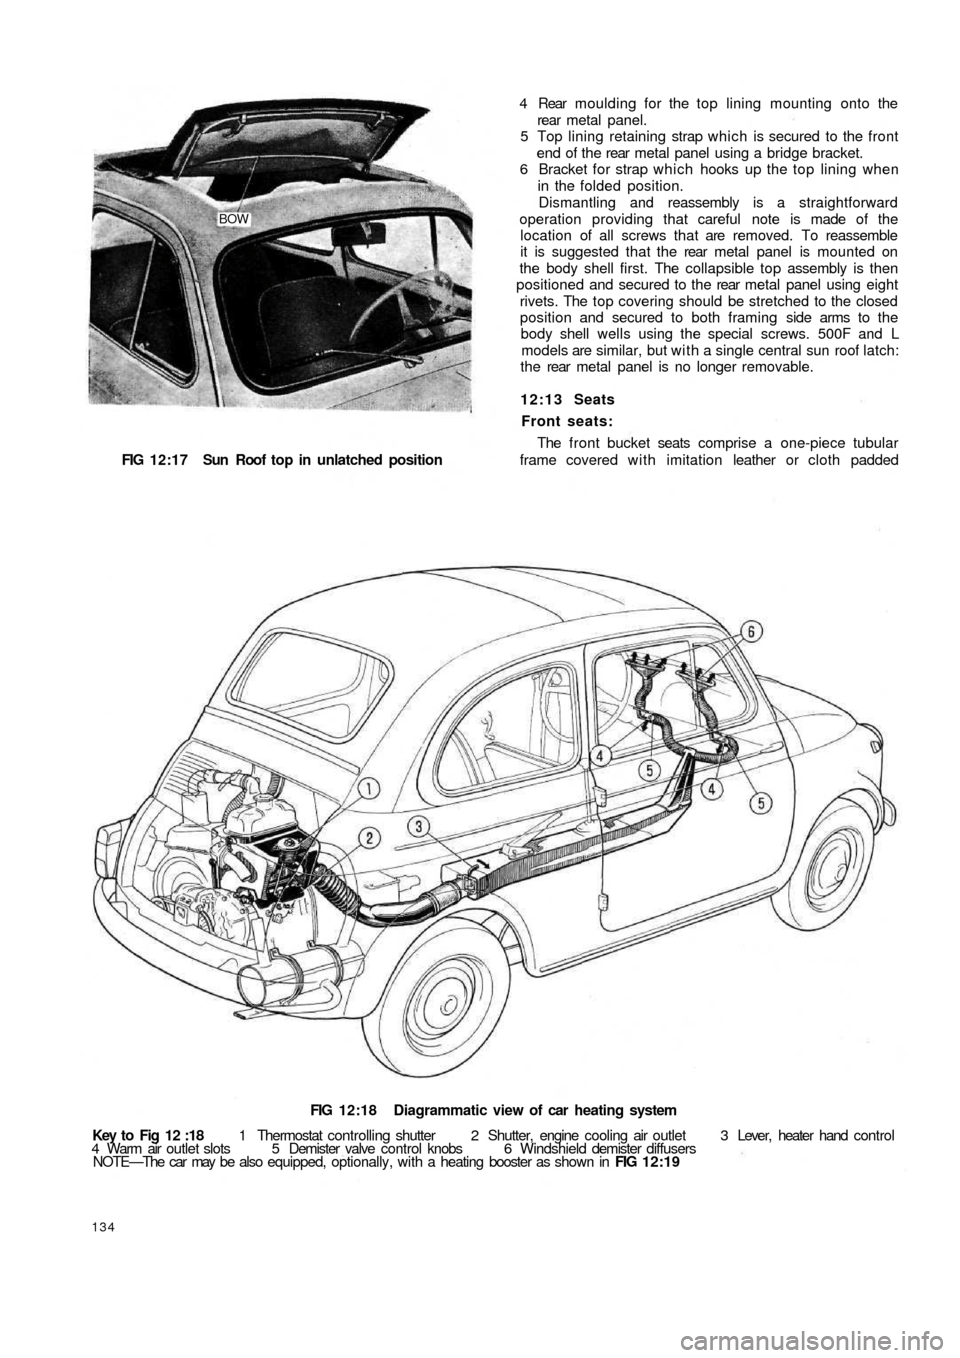 FIAT 500 1965 1.G Workshop Manual BOW
FIG 12:17  Sun Roof  top   in  unlatched position
FIG 12:18 Diagrammatic view of car heating system
Key to Fig 12 :18 1 Thermostat controlling shutter  2  Shutter,  engine  cooling air outlet  3 L